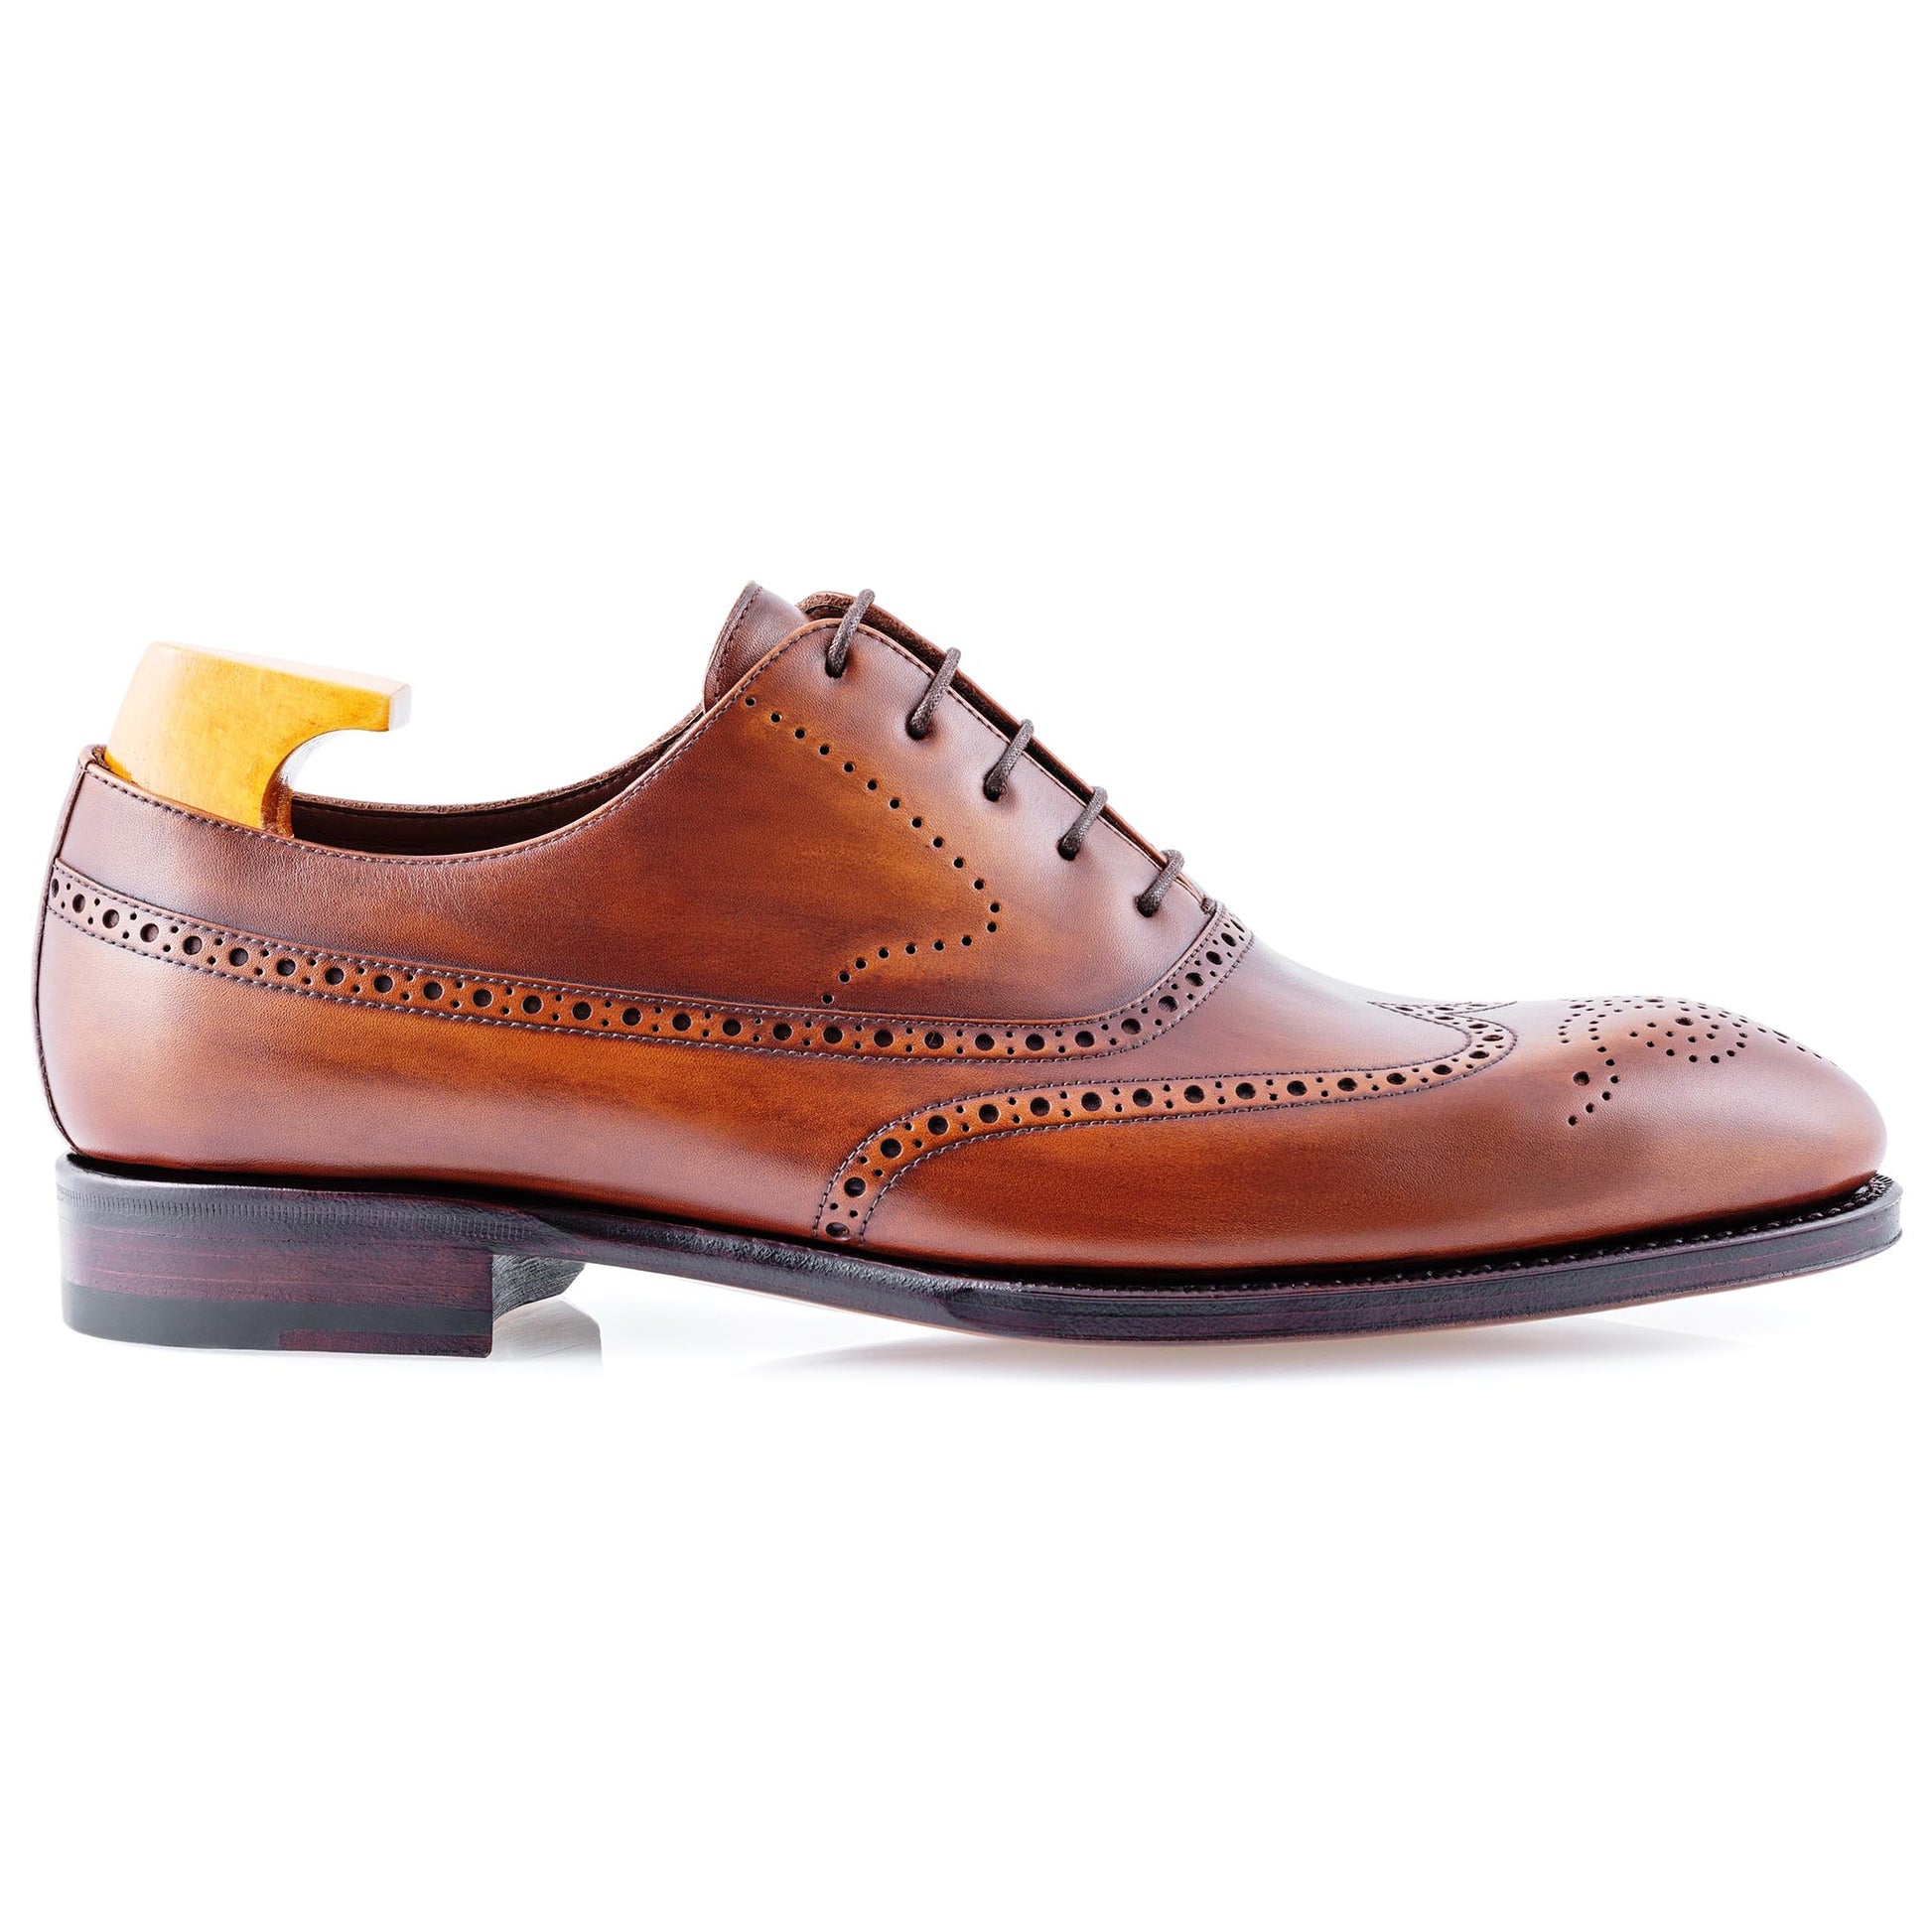 TLB Mallorca leather shoes SMITH